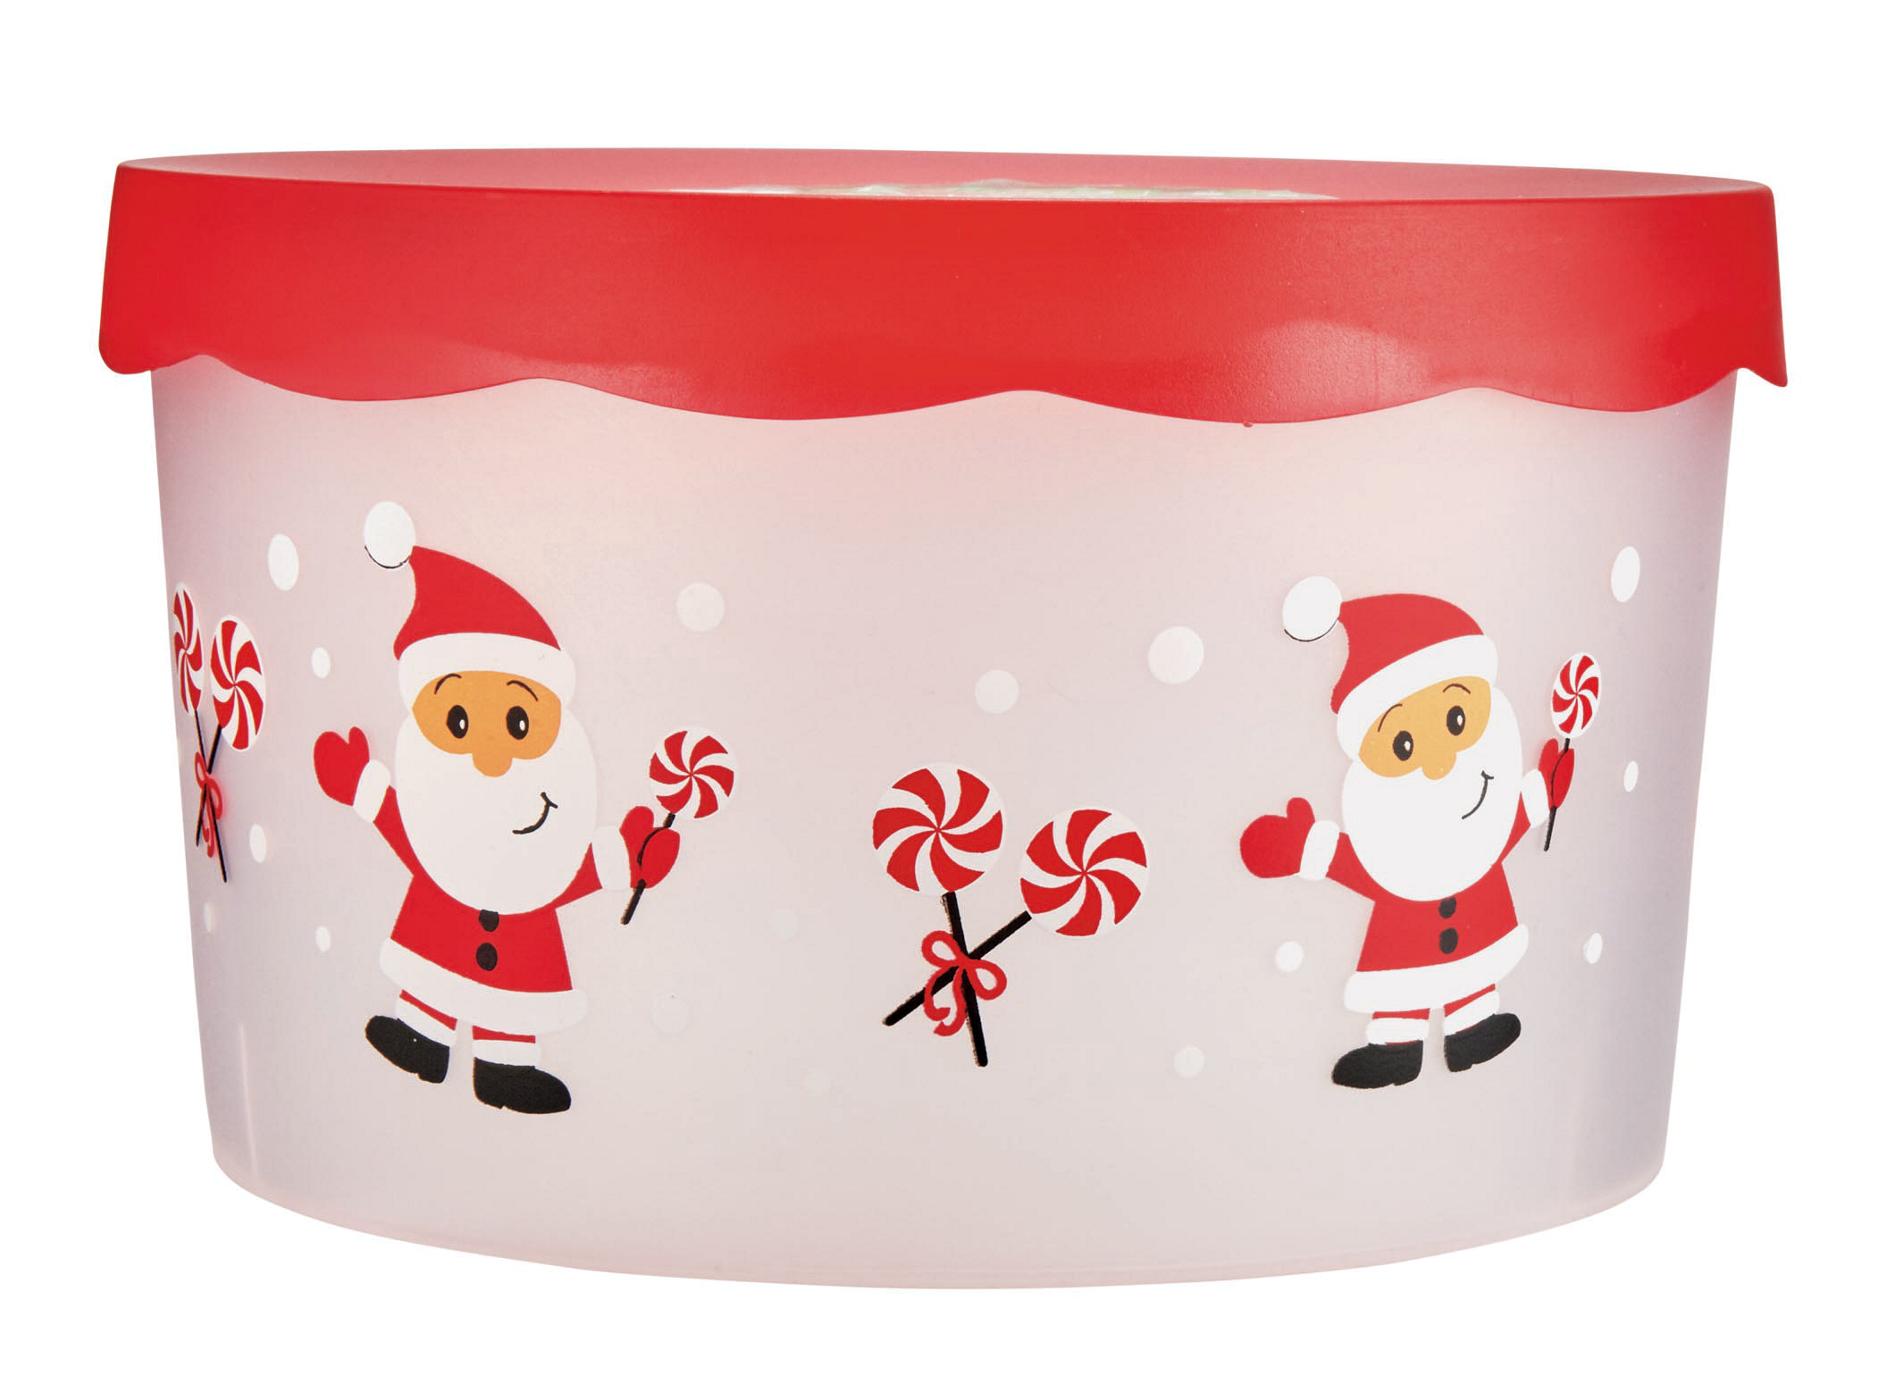 Holiday Helpers Christmas Cookie Containers, Colors & Designs May